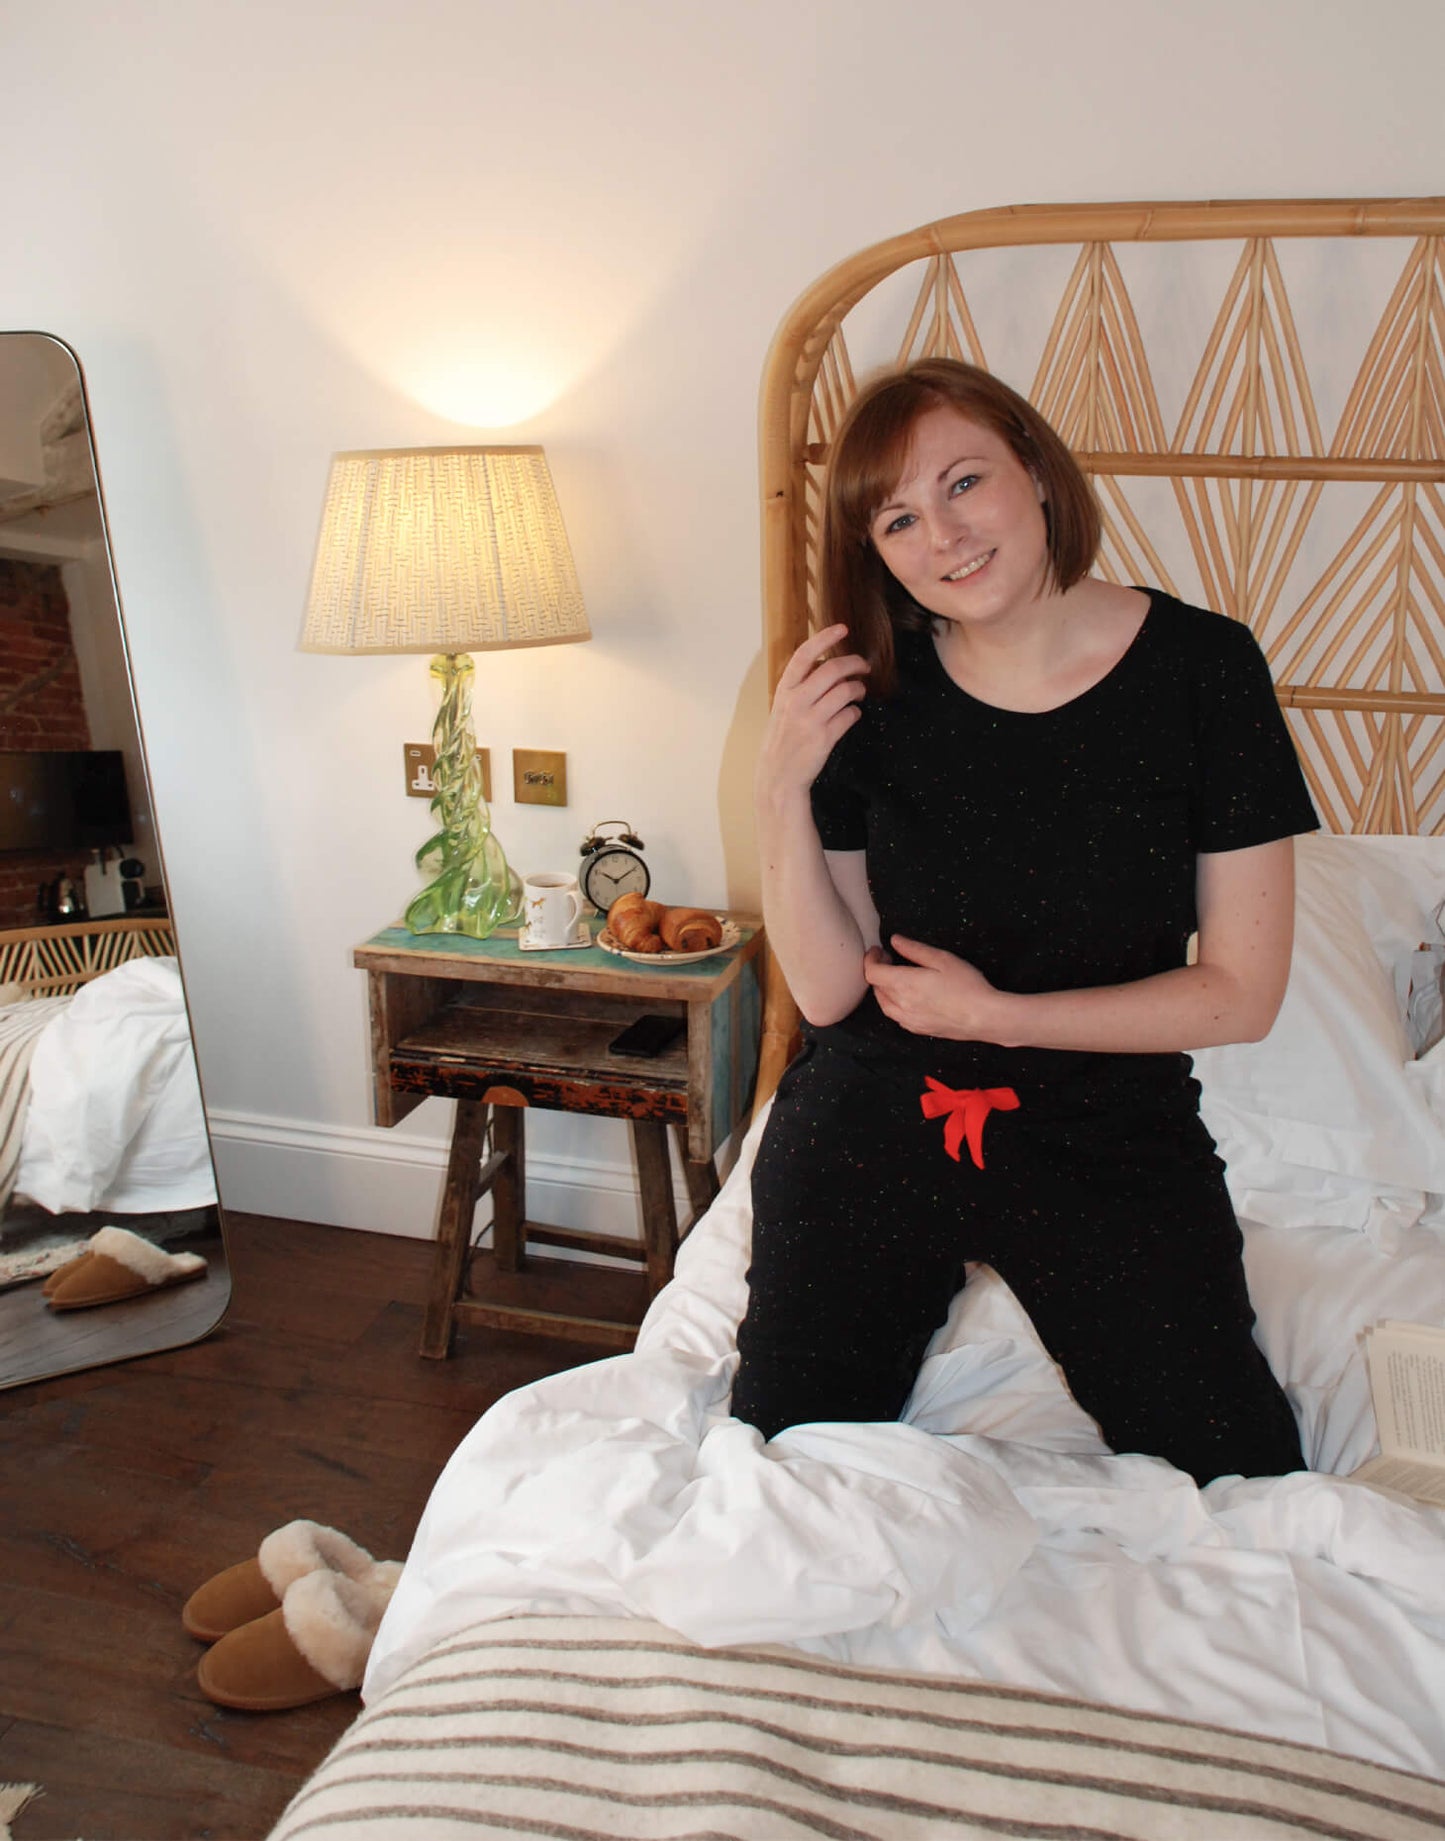 Tessie Clothing Confetti BlackPocket T-Shirt and matching Confetti Black Pyjama Trousers Set | Model knelt on white bedding with a light wood cane headboard wearing Tessie Clothing's Confetti Black Pocket T-Shirt Pyjama Set with some chestnut brown sheepskin slipper mules next to the bed. Next to the bed is a rustic side table with a croissant on it, retro lamp, retro alarm clock and a dog print mug and coaster.